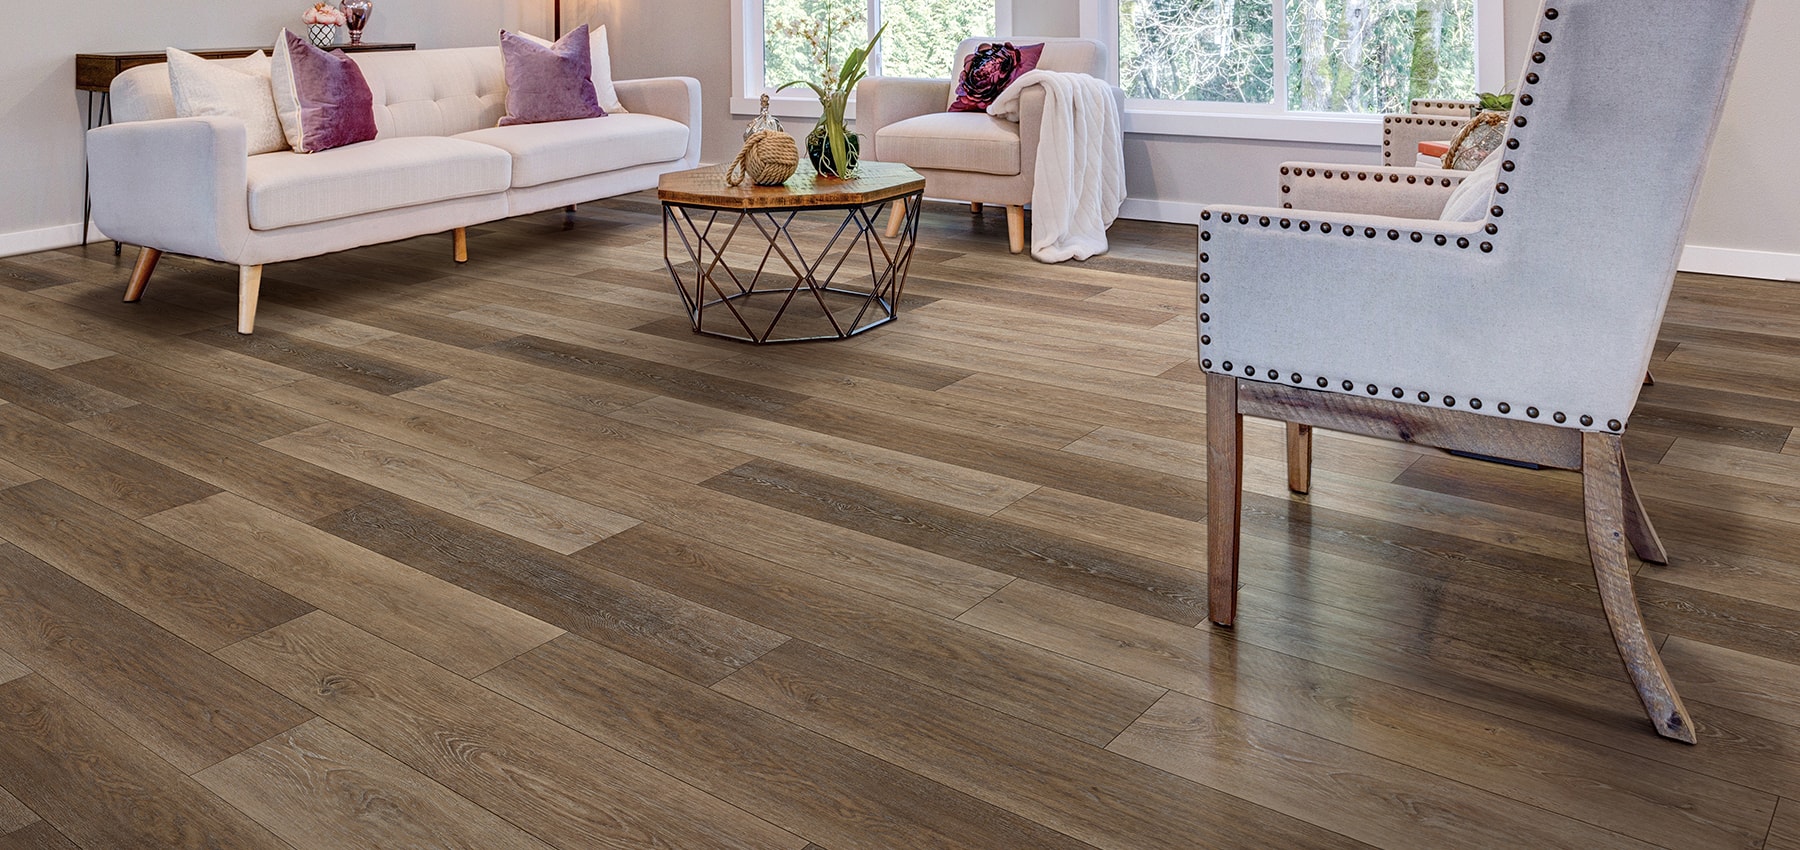 Great Lakes Flooring Quality Service, Great Floors Laminate